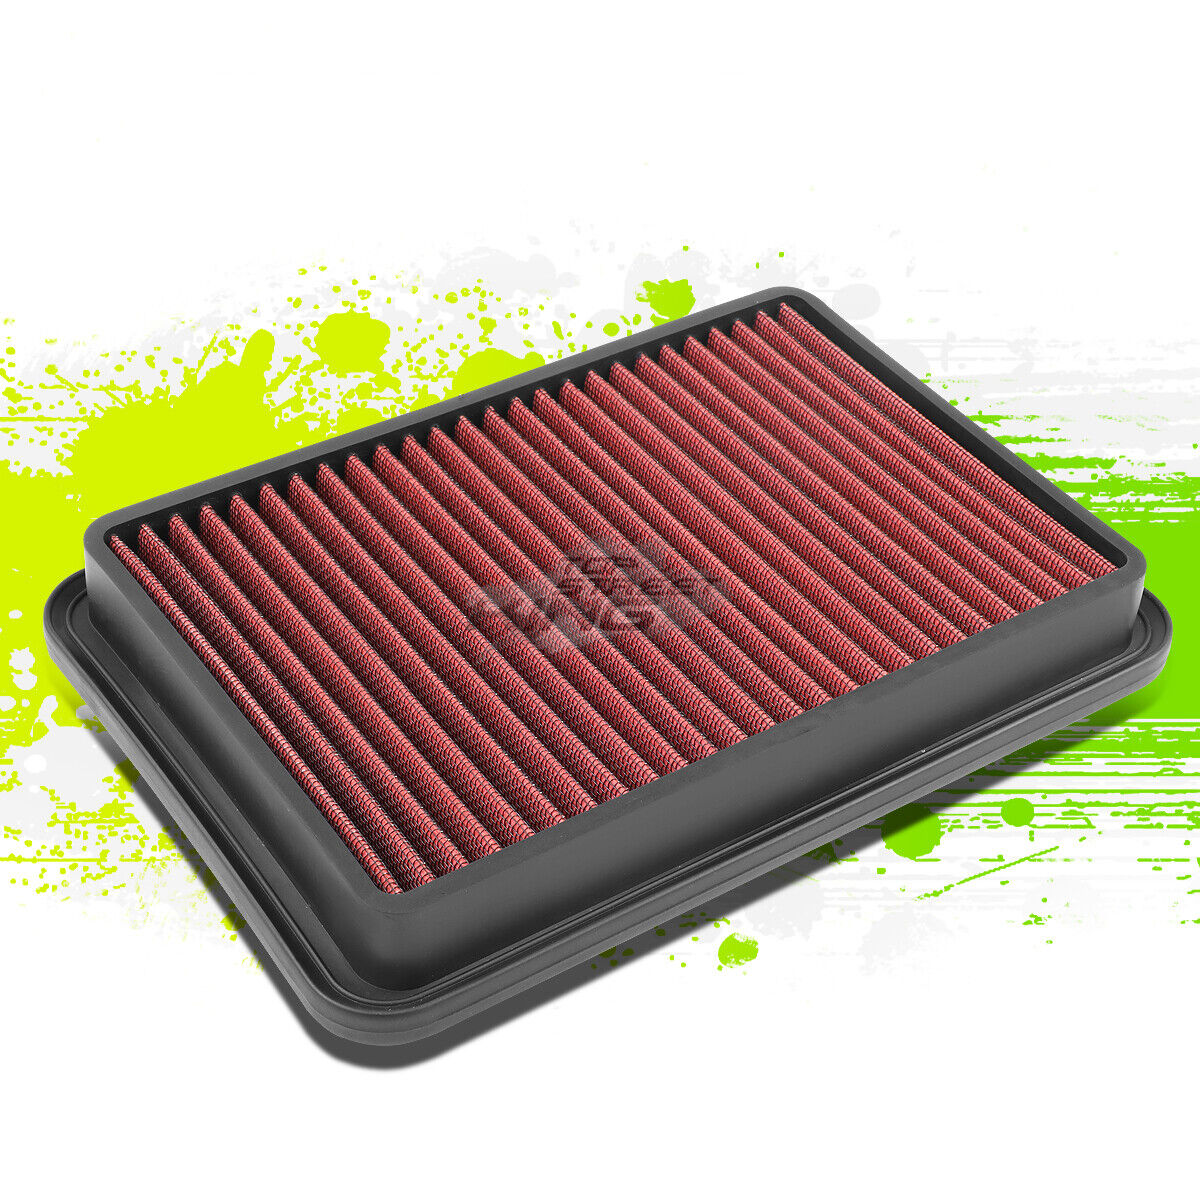 Washable High Flow Panel Air Filter Red for Impulse 929 4Runner Previa 89-04